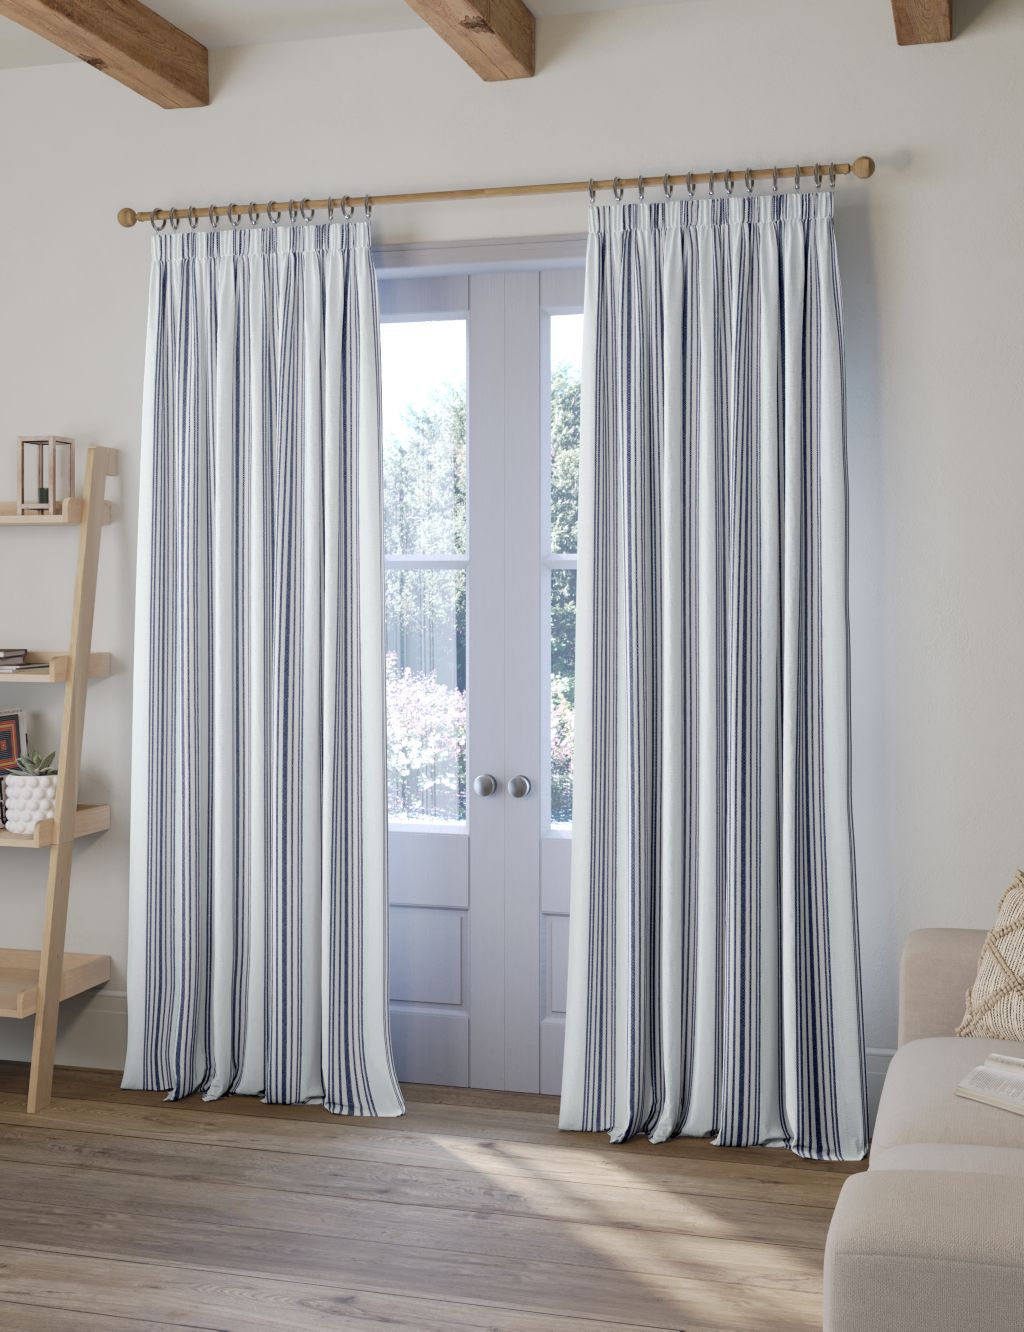 Woven Striped Pencil Pleat Curtains image 1